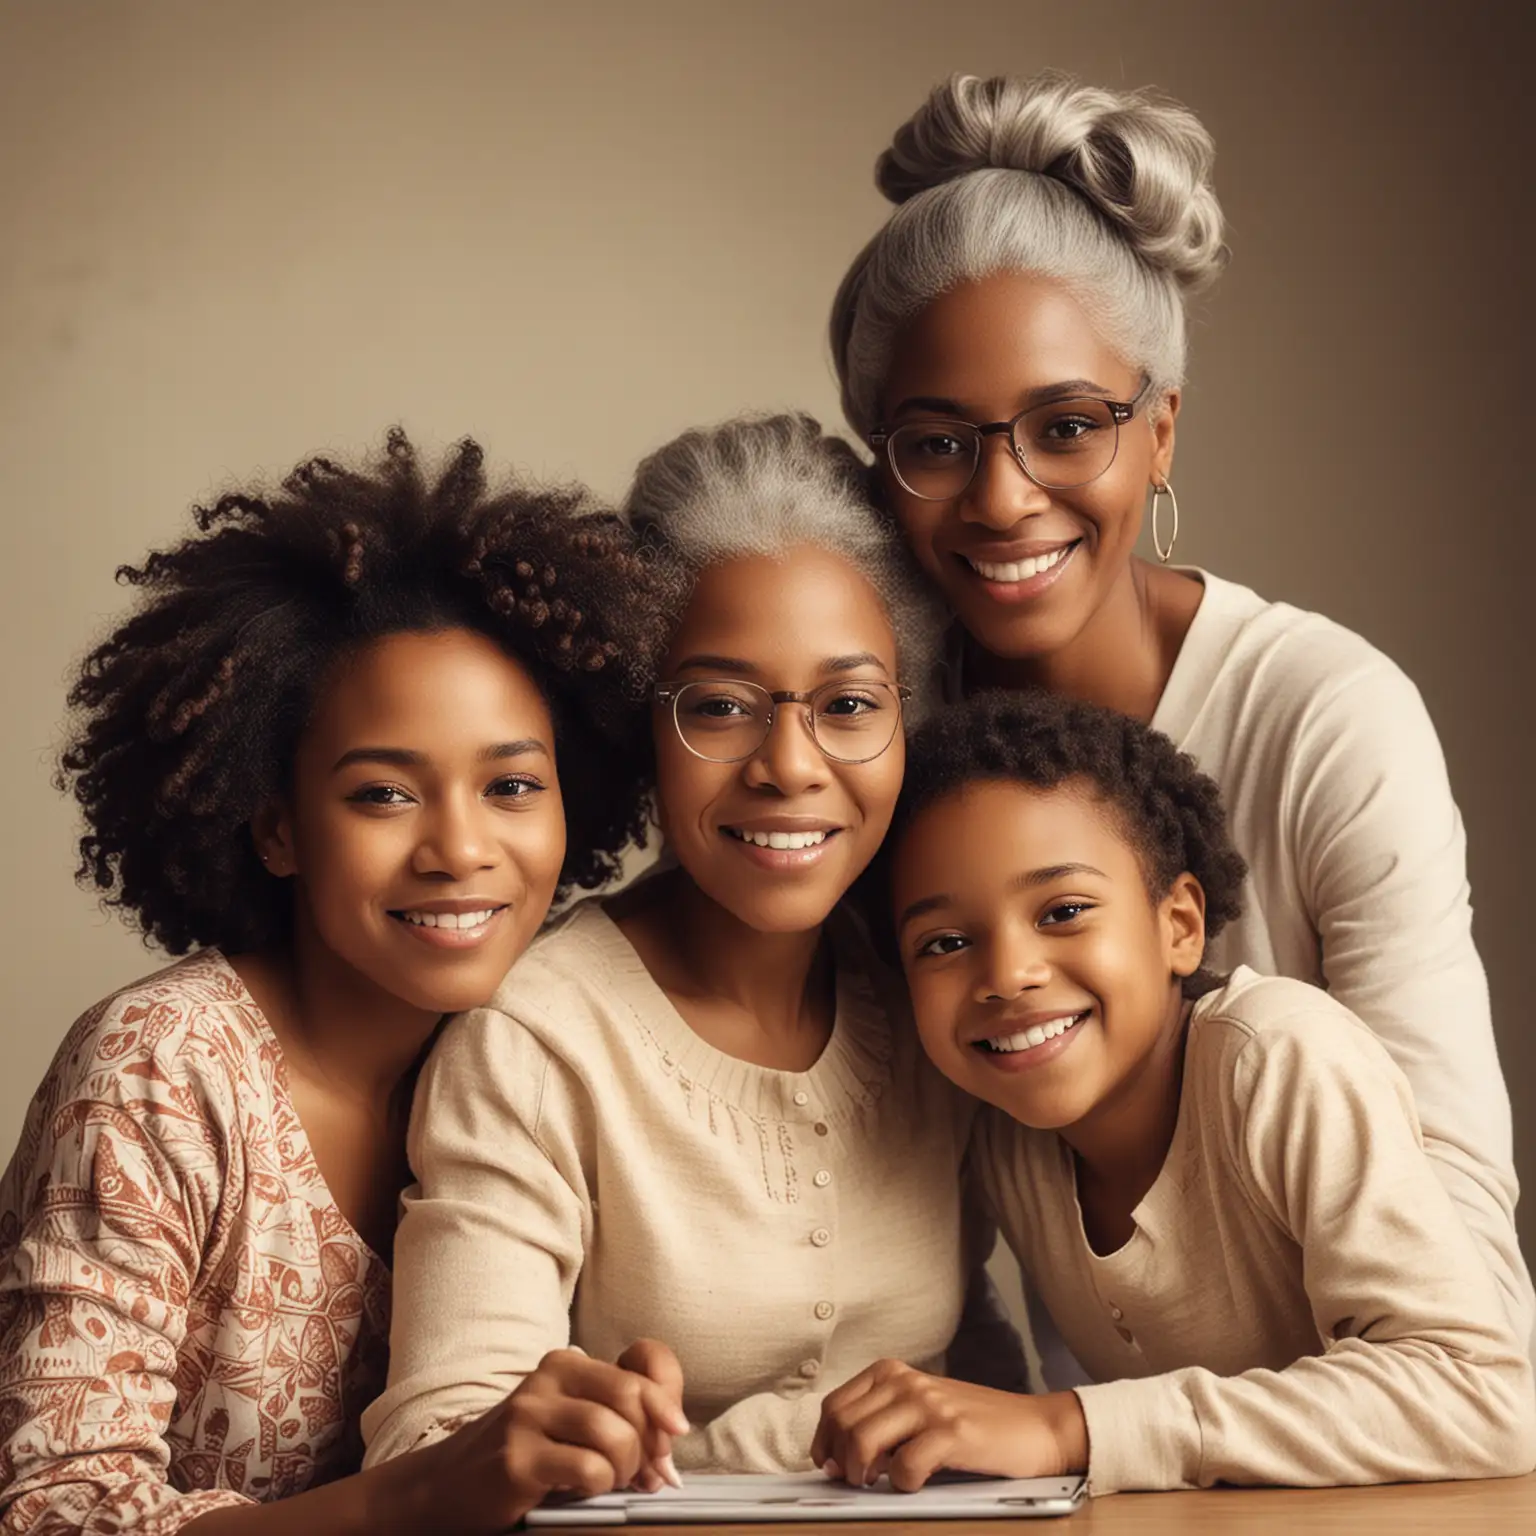 create an image that depicts an African American millennial family with a grandmother, daughter, and granddaughter